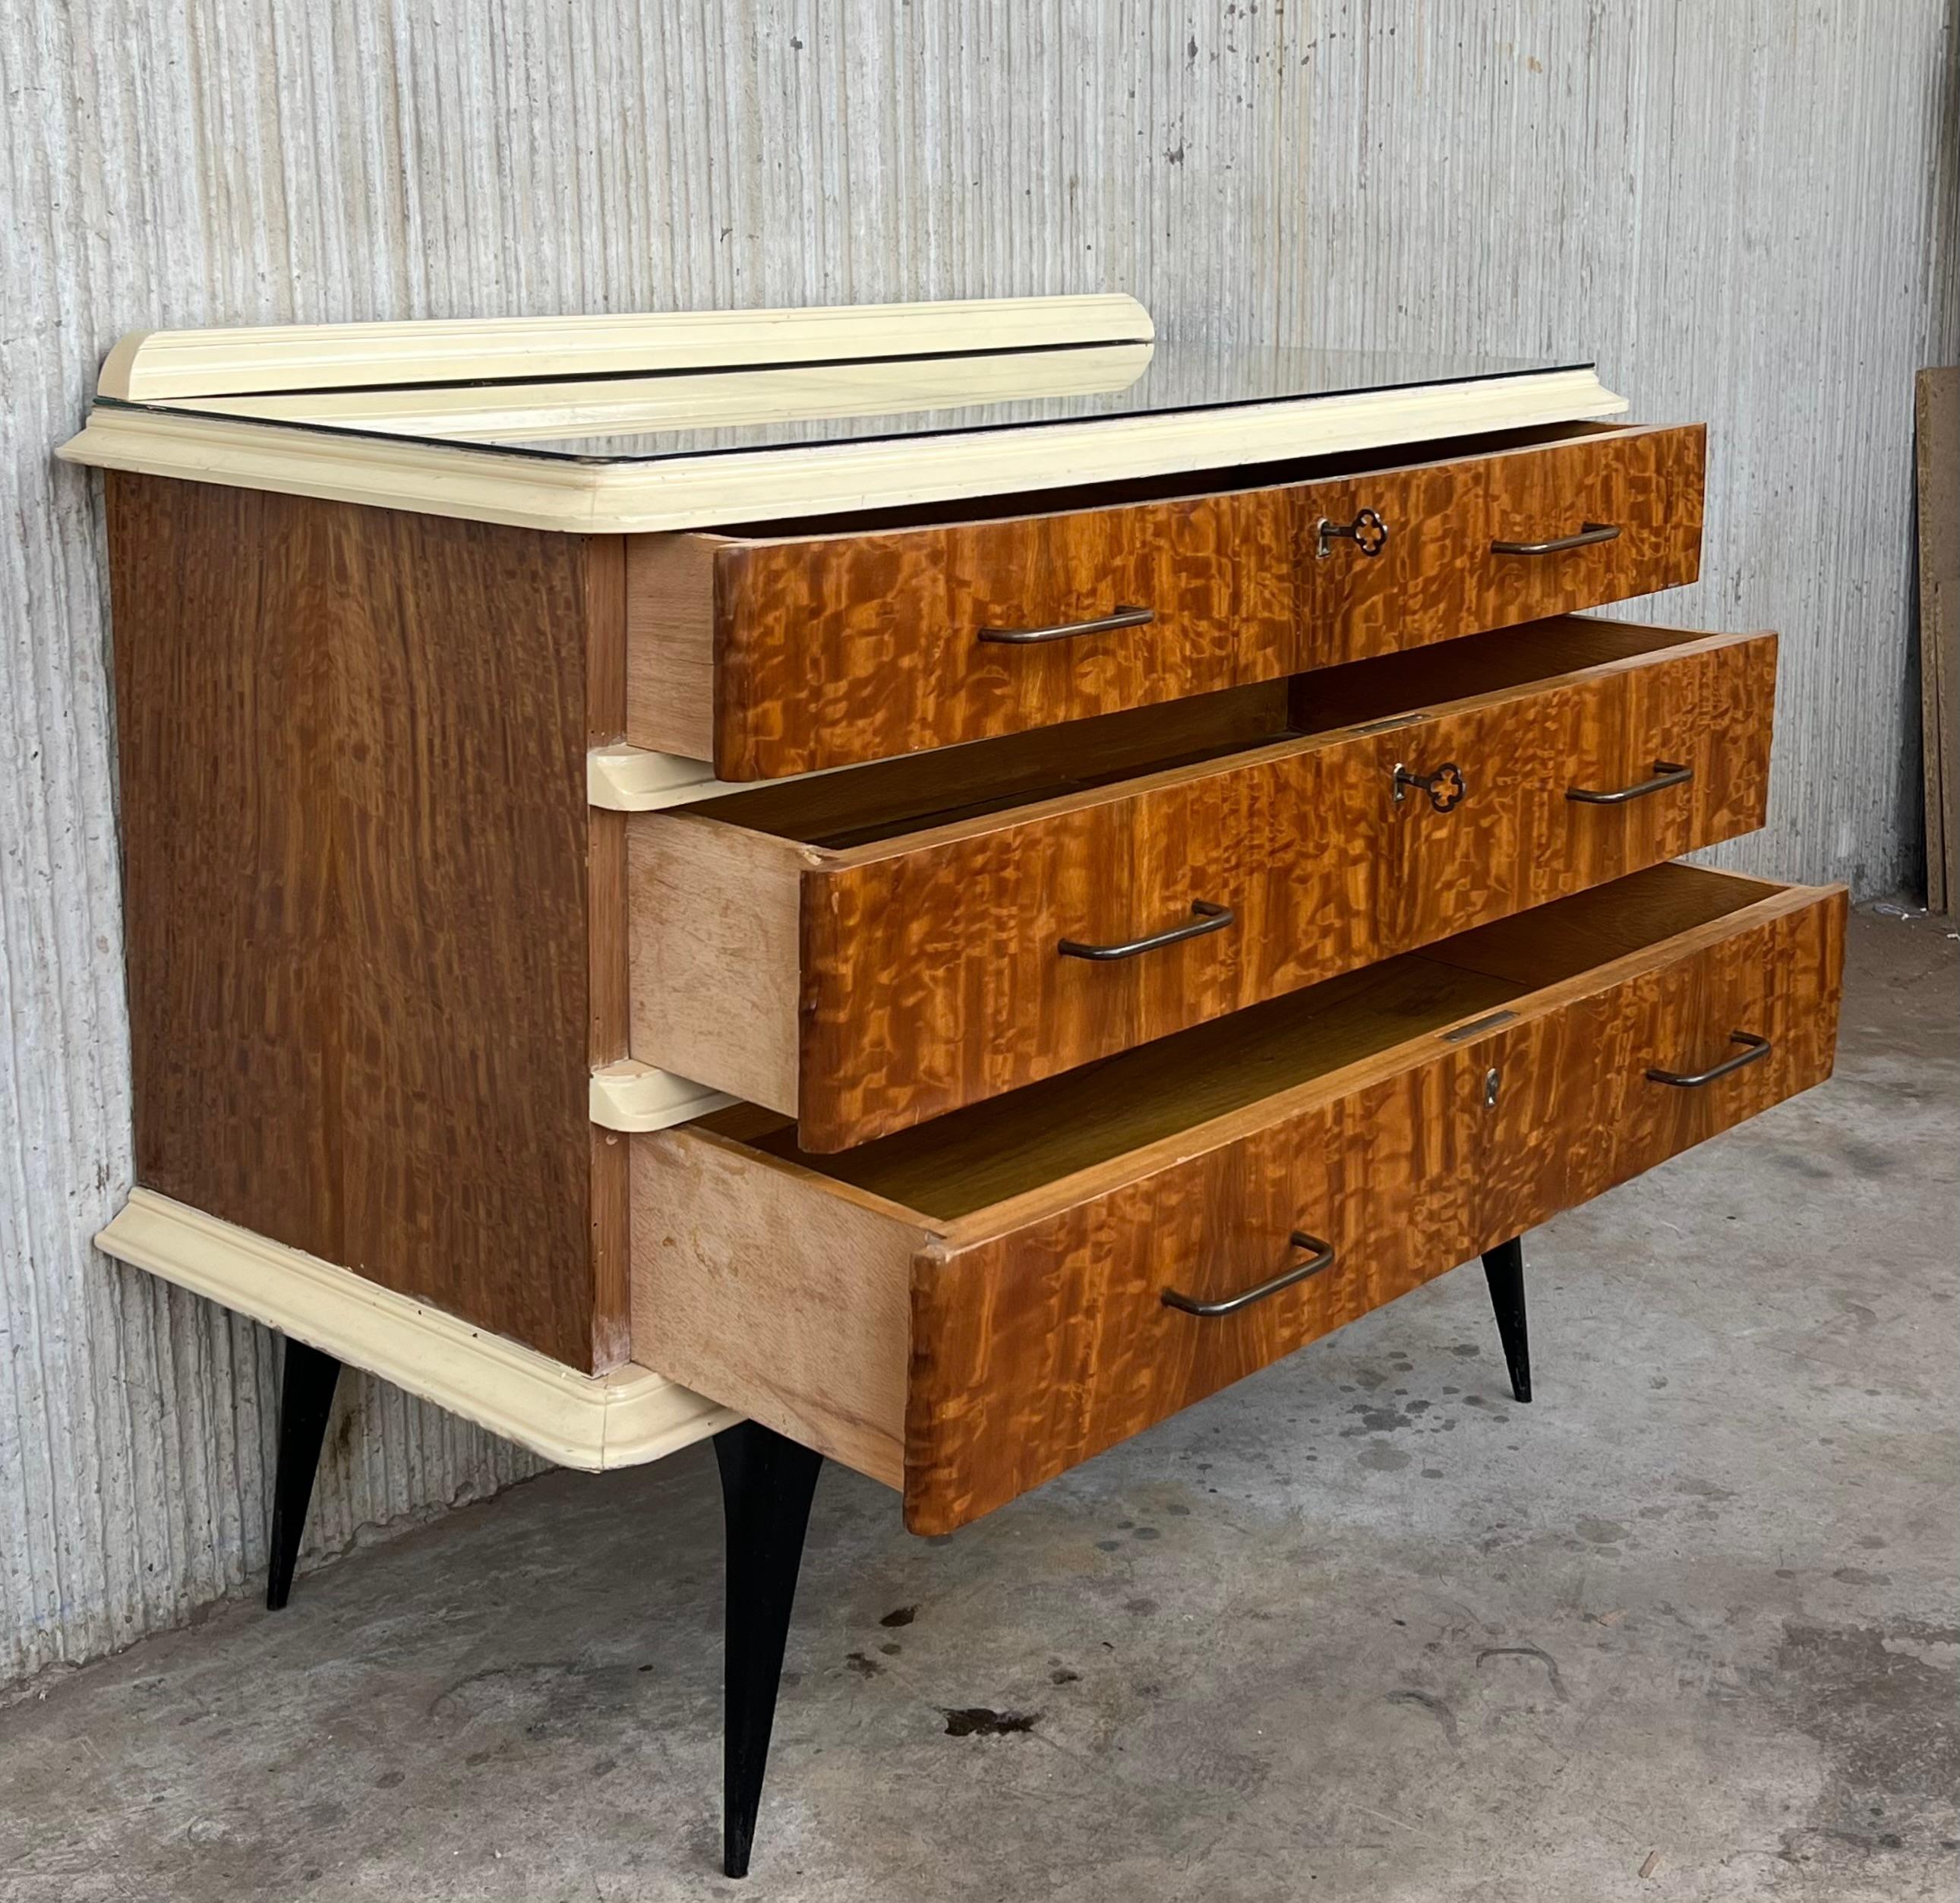 Italian Mid Century Modern Chest of Drawers or Commode in Wood/Cream with Black Legs For Sale